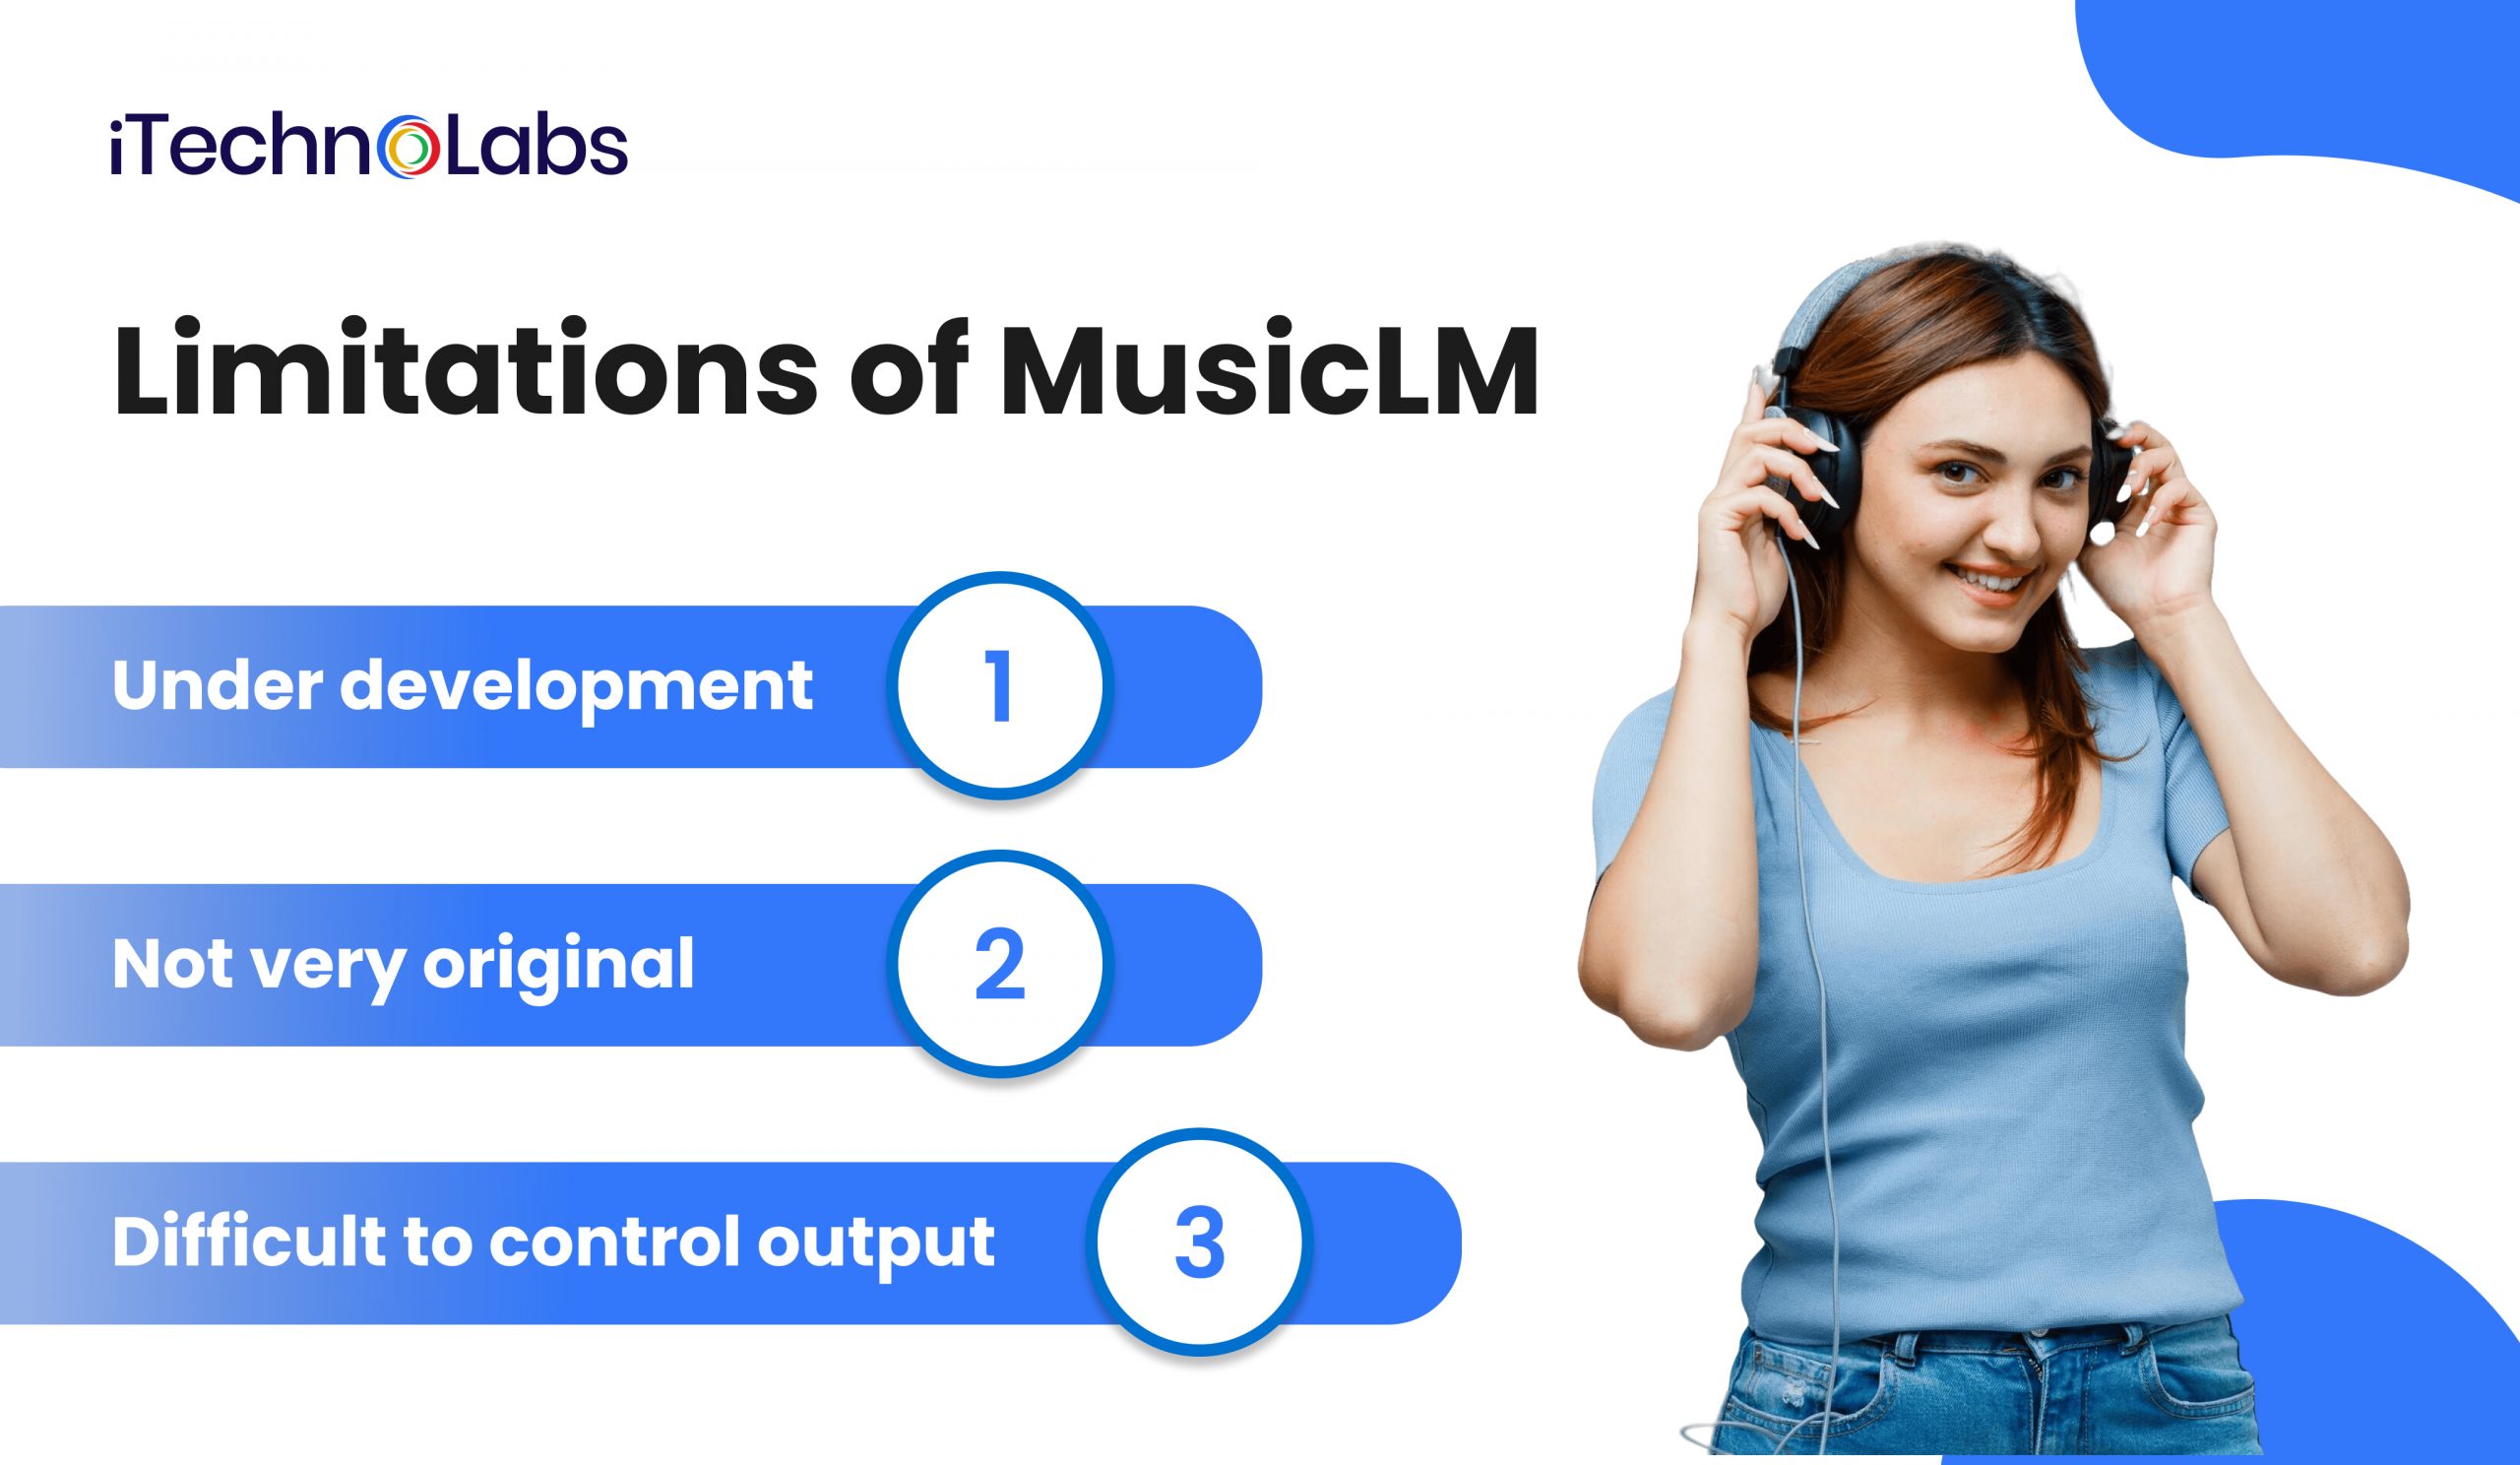 iTechnolabs-Limitations of MusicLm